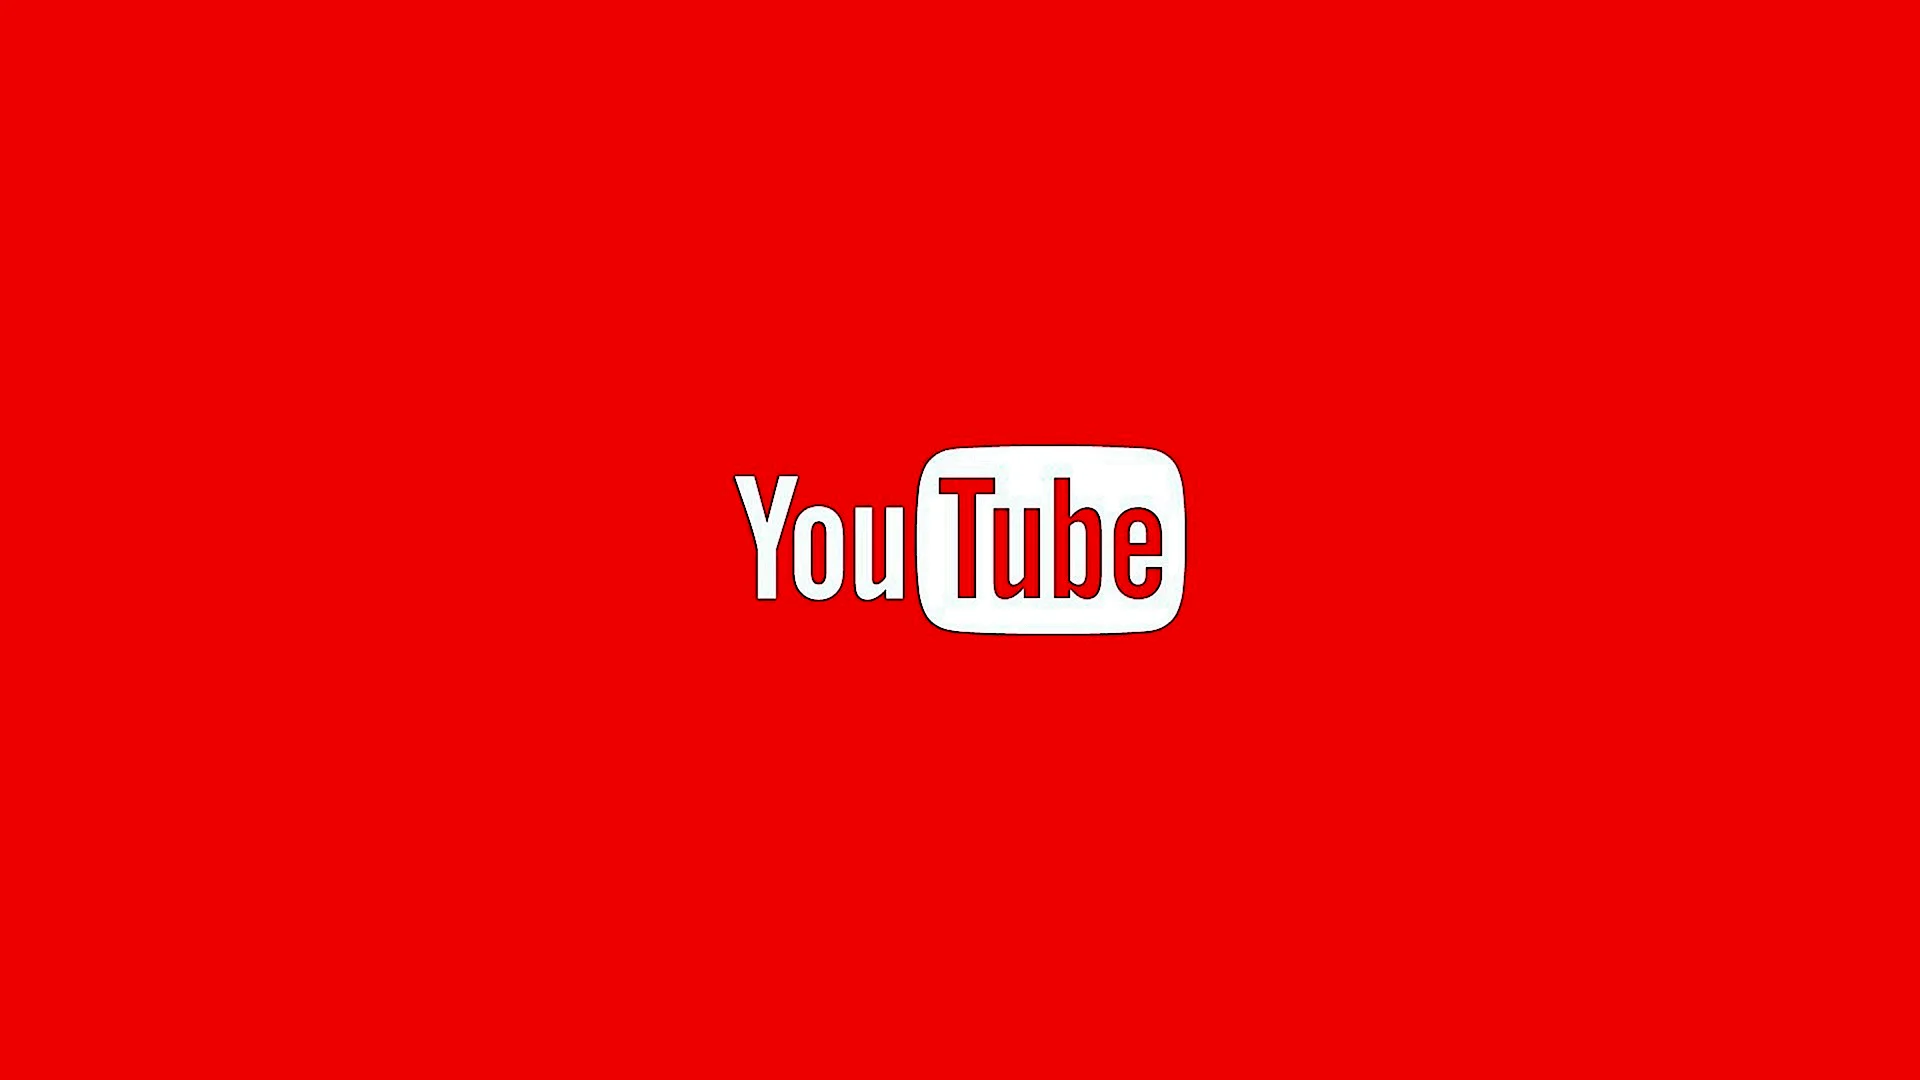 Youtube Red Wallpaper